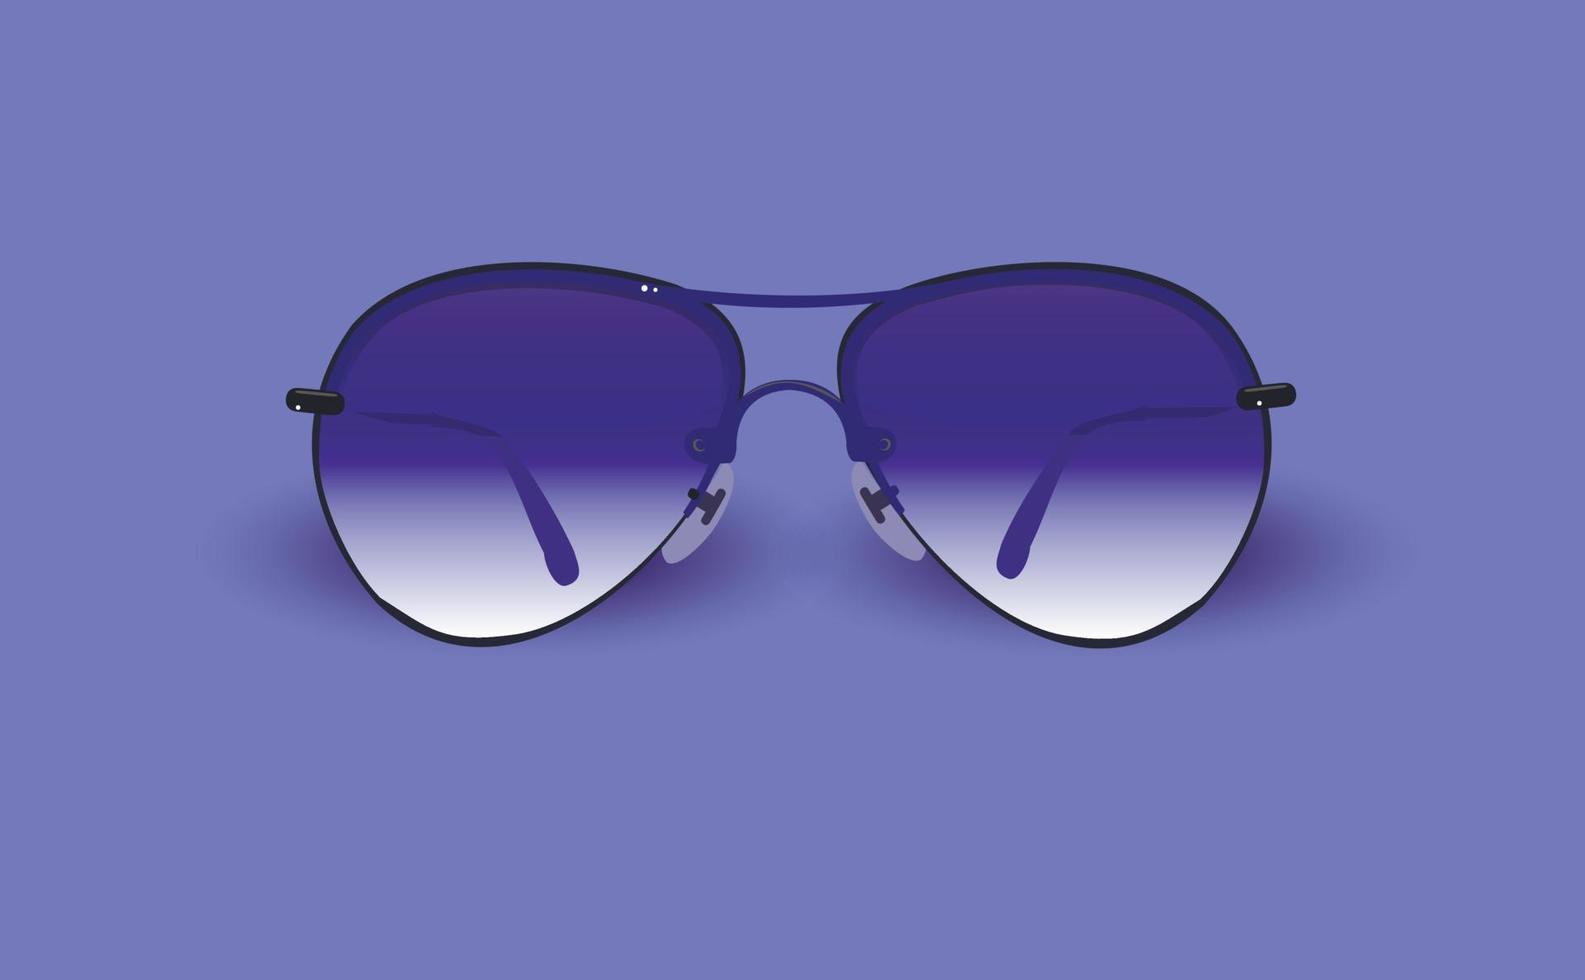 Aviator sunglasses on a purple background in trendy color very peri. Travel accessory. copy space. Vector illustration